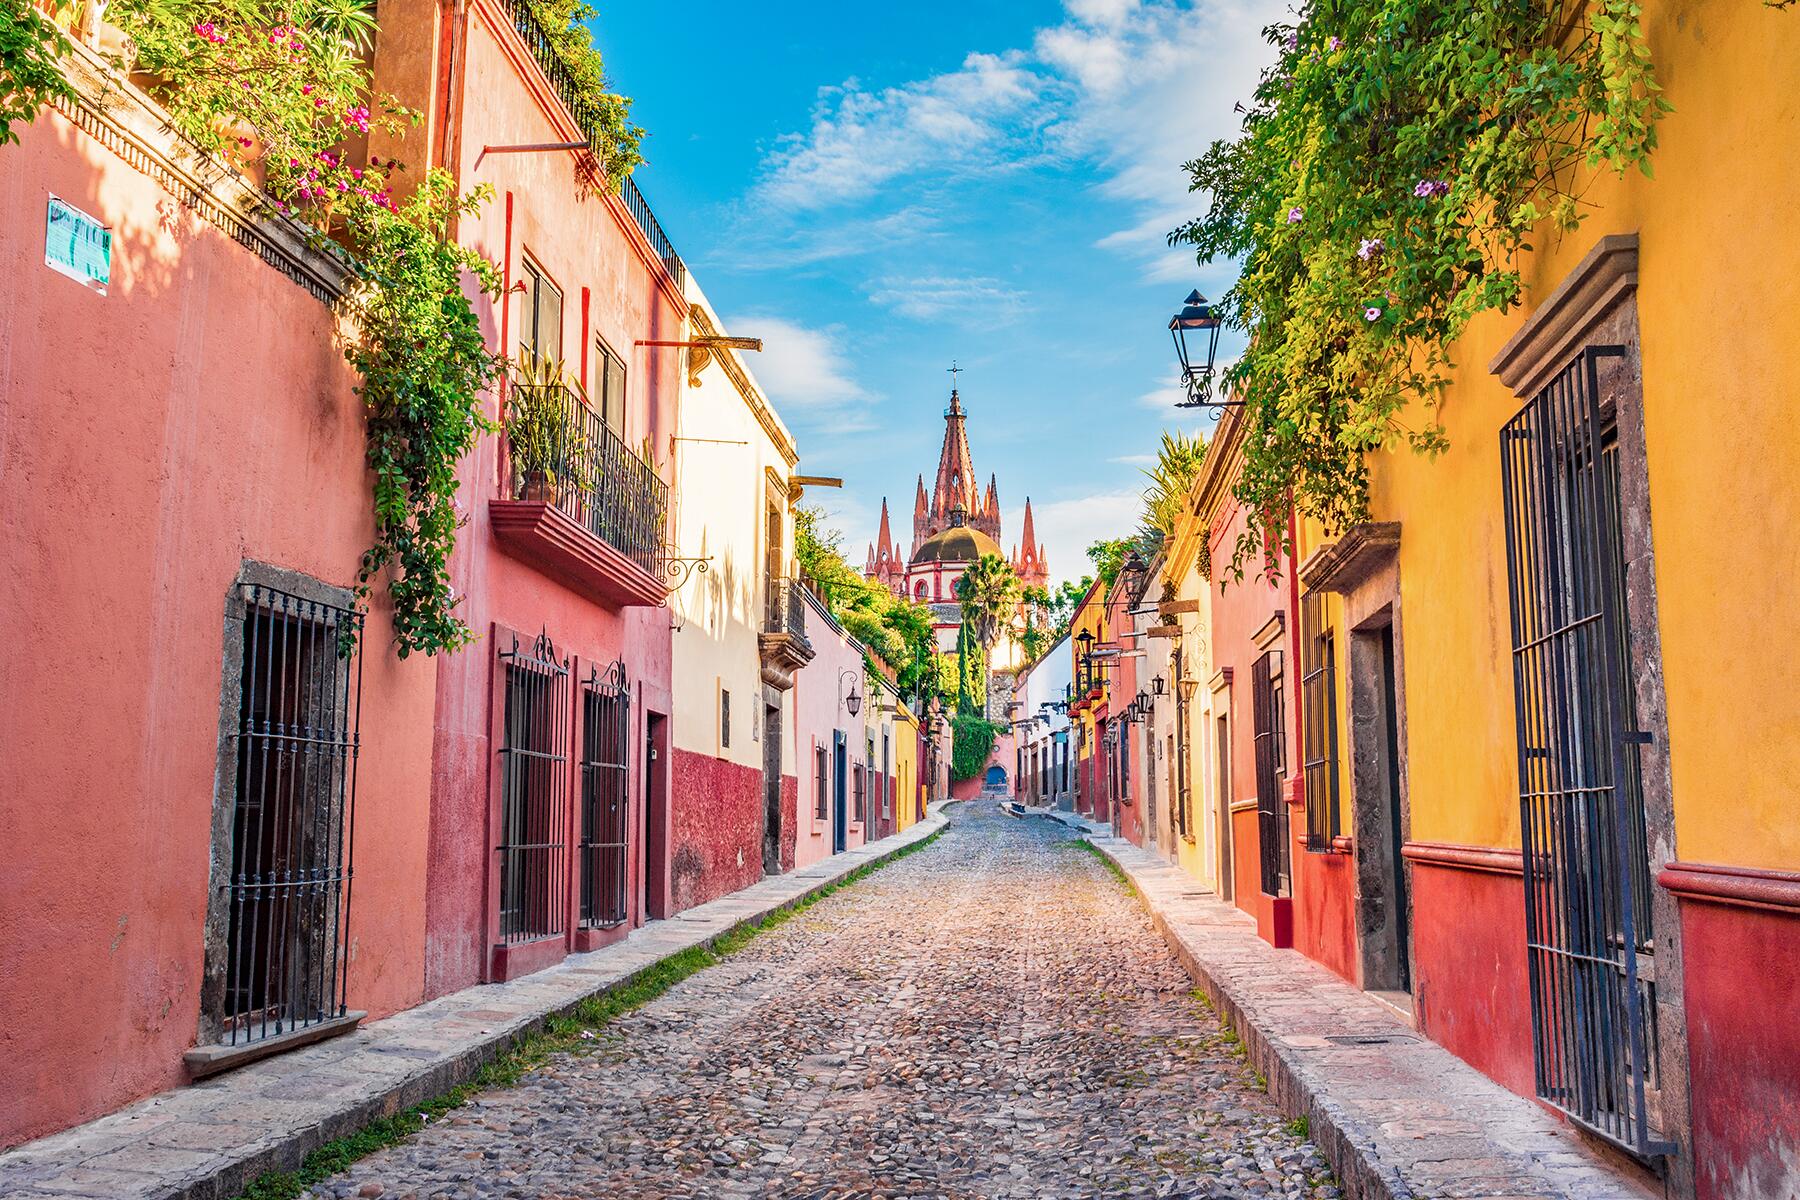 Is It Safe To Go To San Miguel de Allende Right Now?